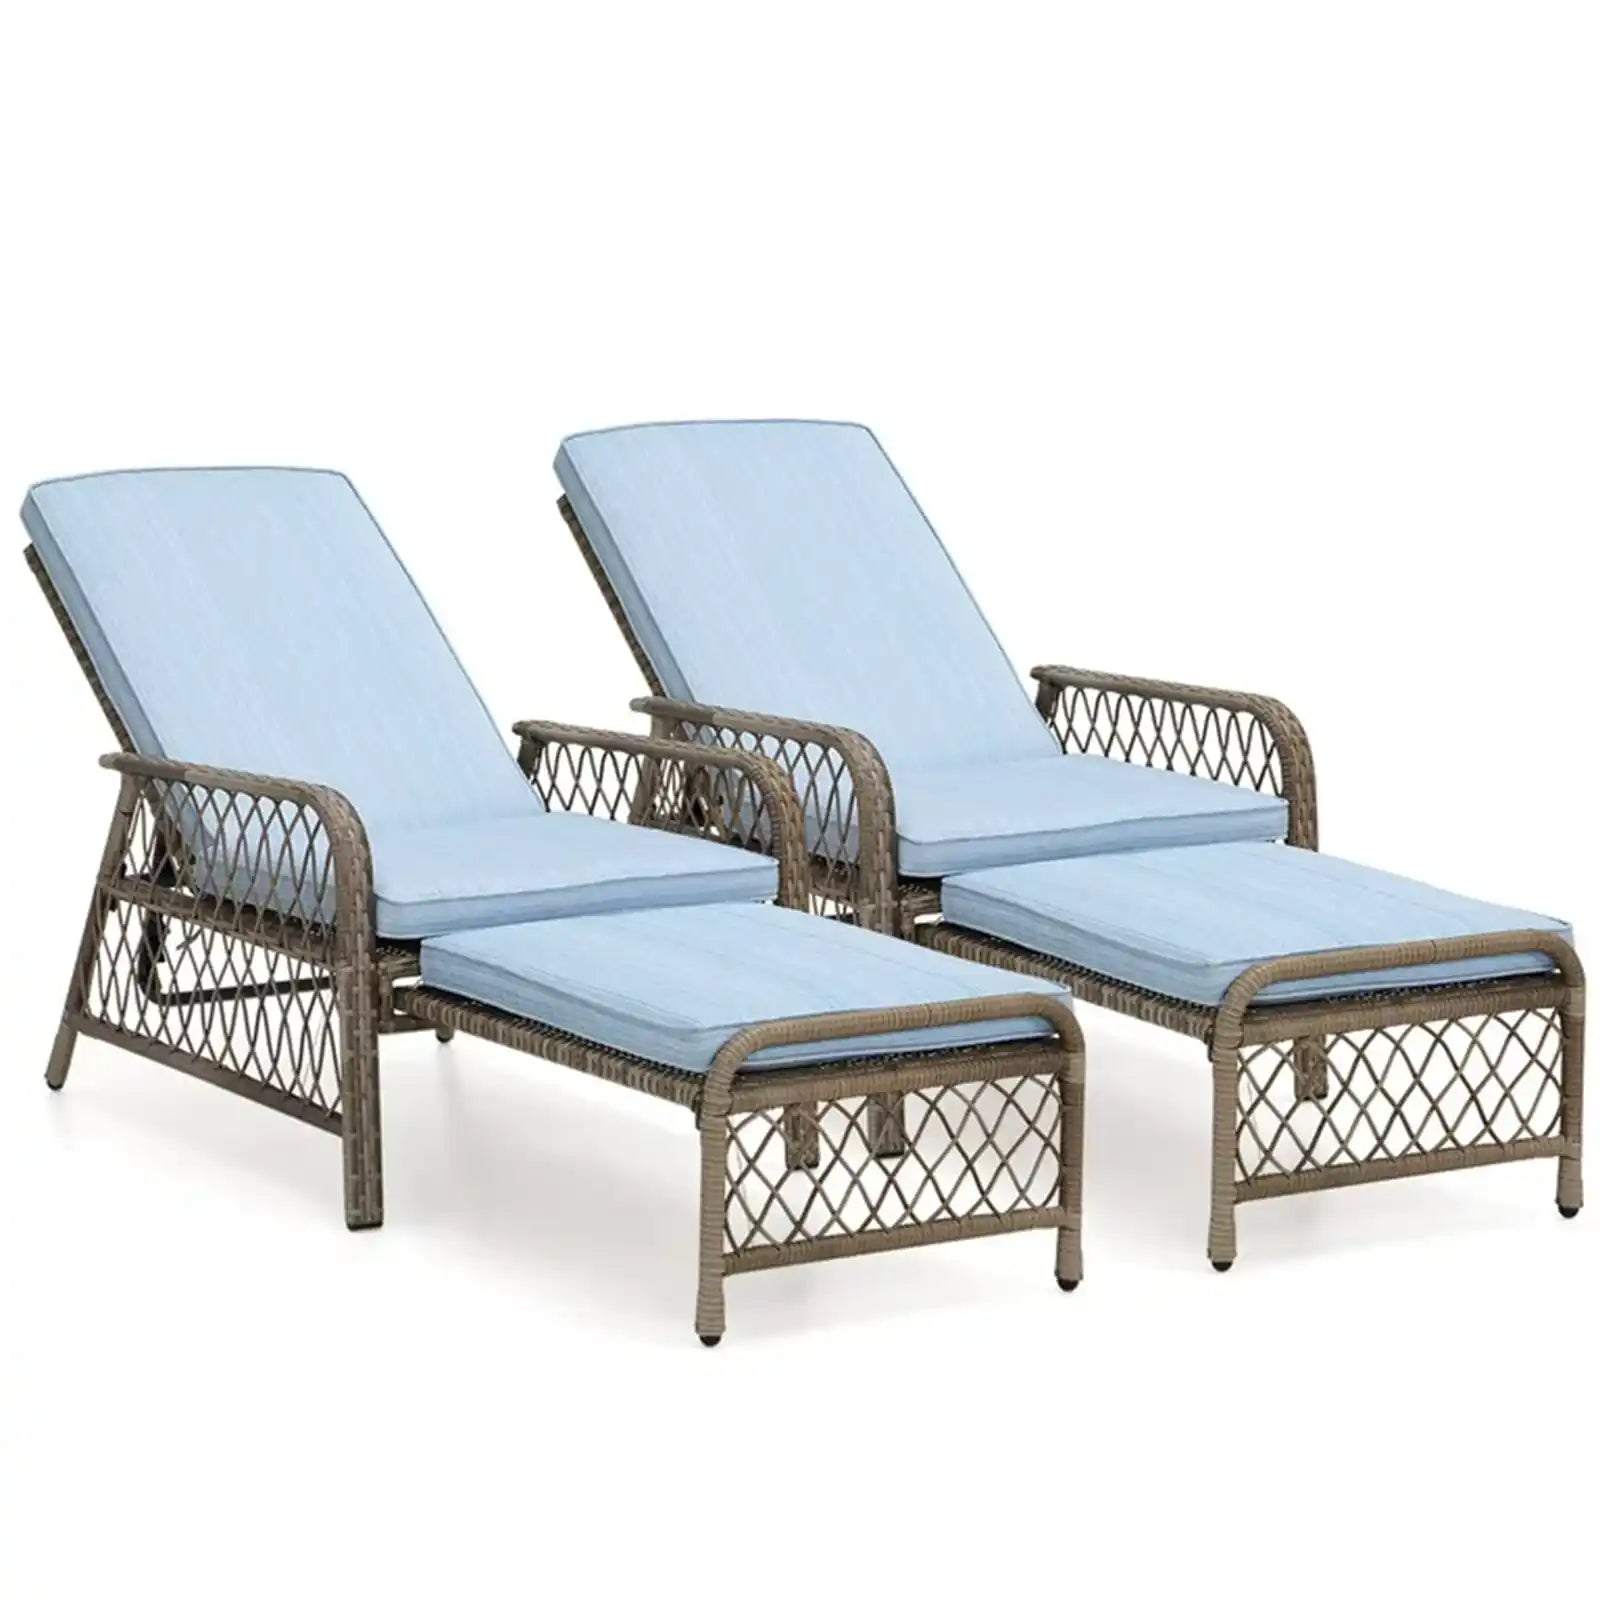 Outdoor Chair Lounge Chair Adjustable 5 Position with Cushions Retractable Foot-Rest - Steel Frame Material Wicker Rattan